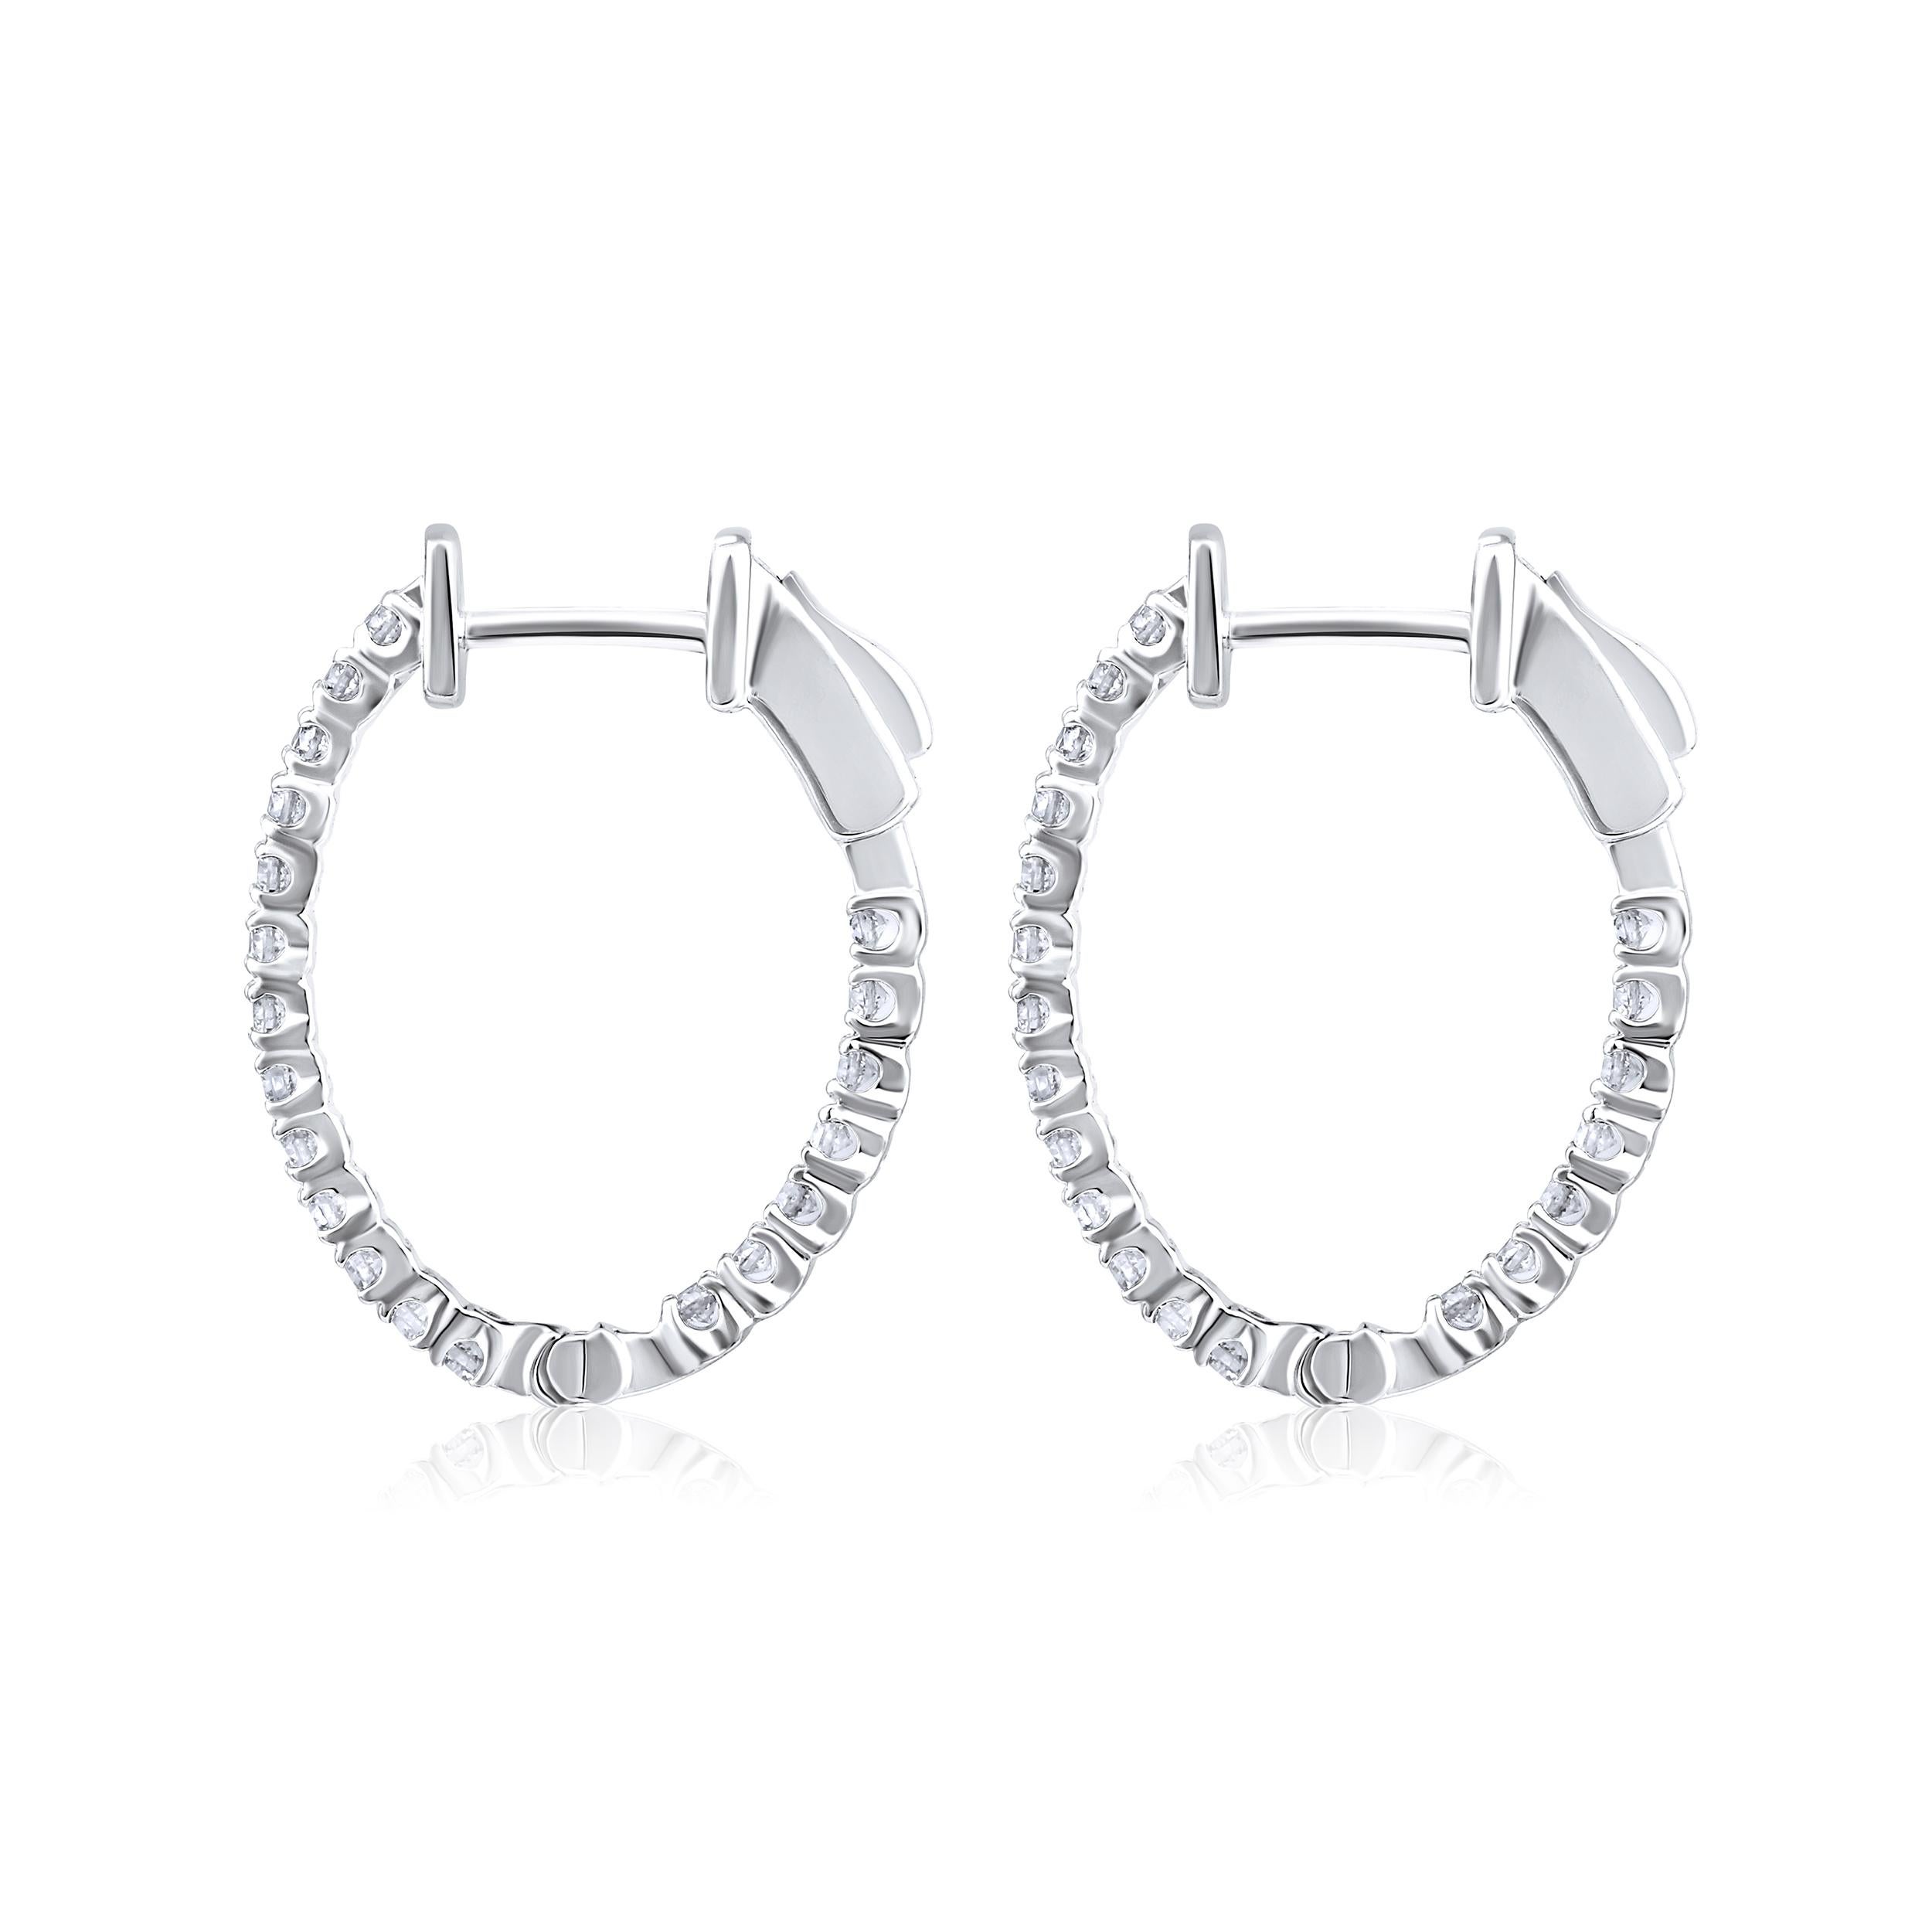 Brilliant Cut Certified 14k Gold 0.5 Carat Natural Diamond Oval Inside Out Hoop Earrings For Sale